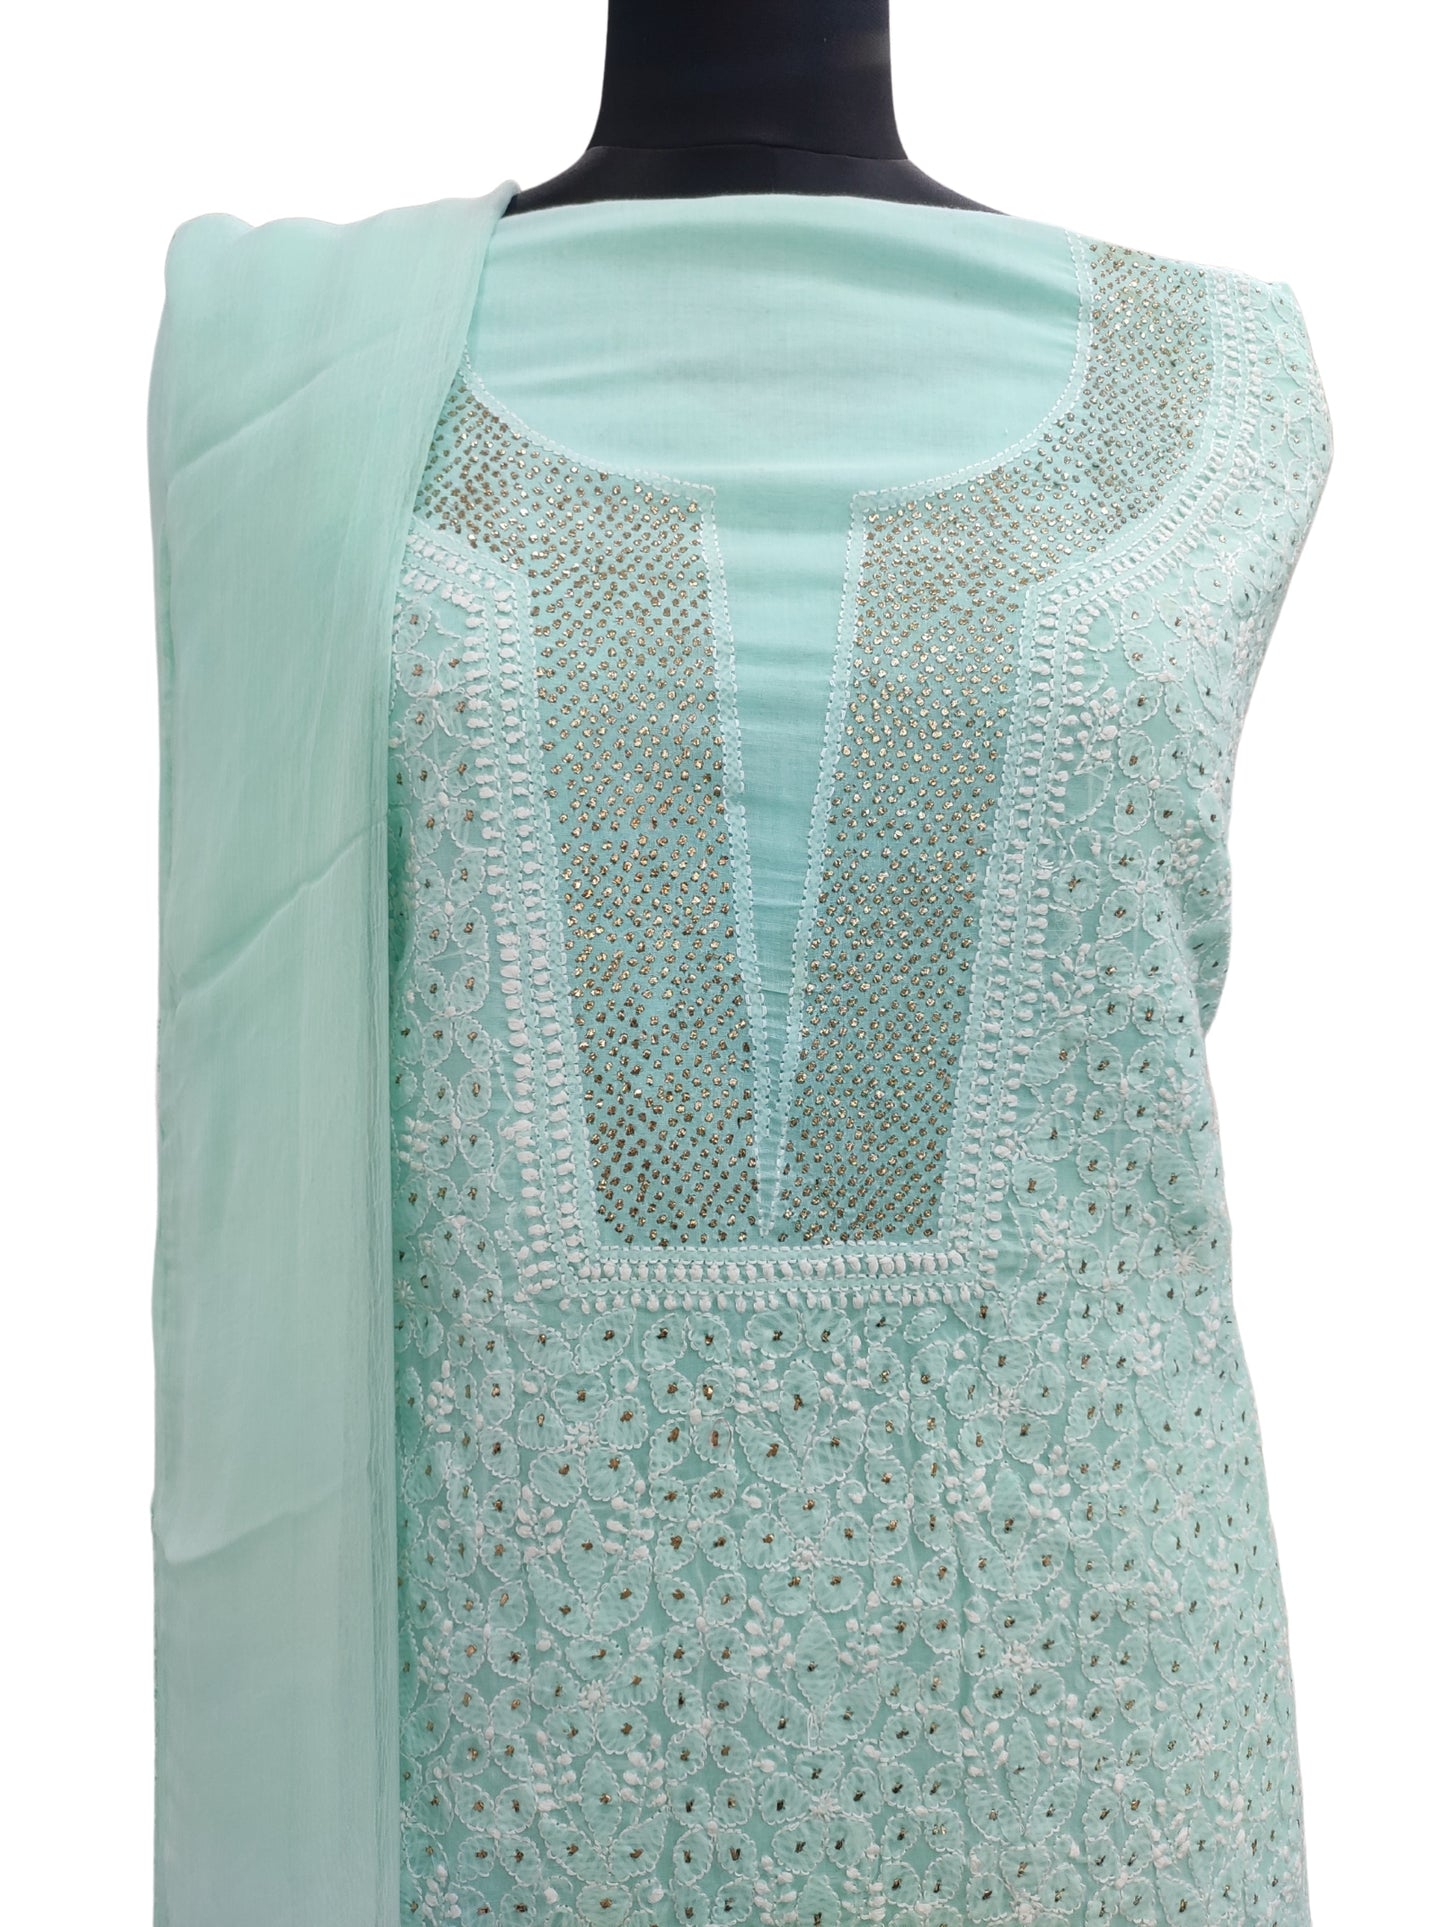 Shyamal Chikan Hand Embroidered Sea Green Cotton Lucknowi Chikankari Unstitched Suit Piece With Mukaish Work - S12198 - Shyamal Chikan